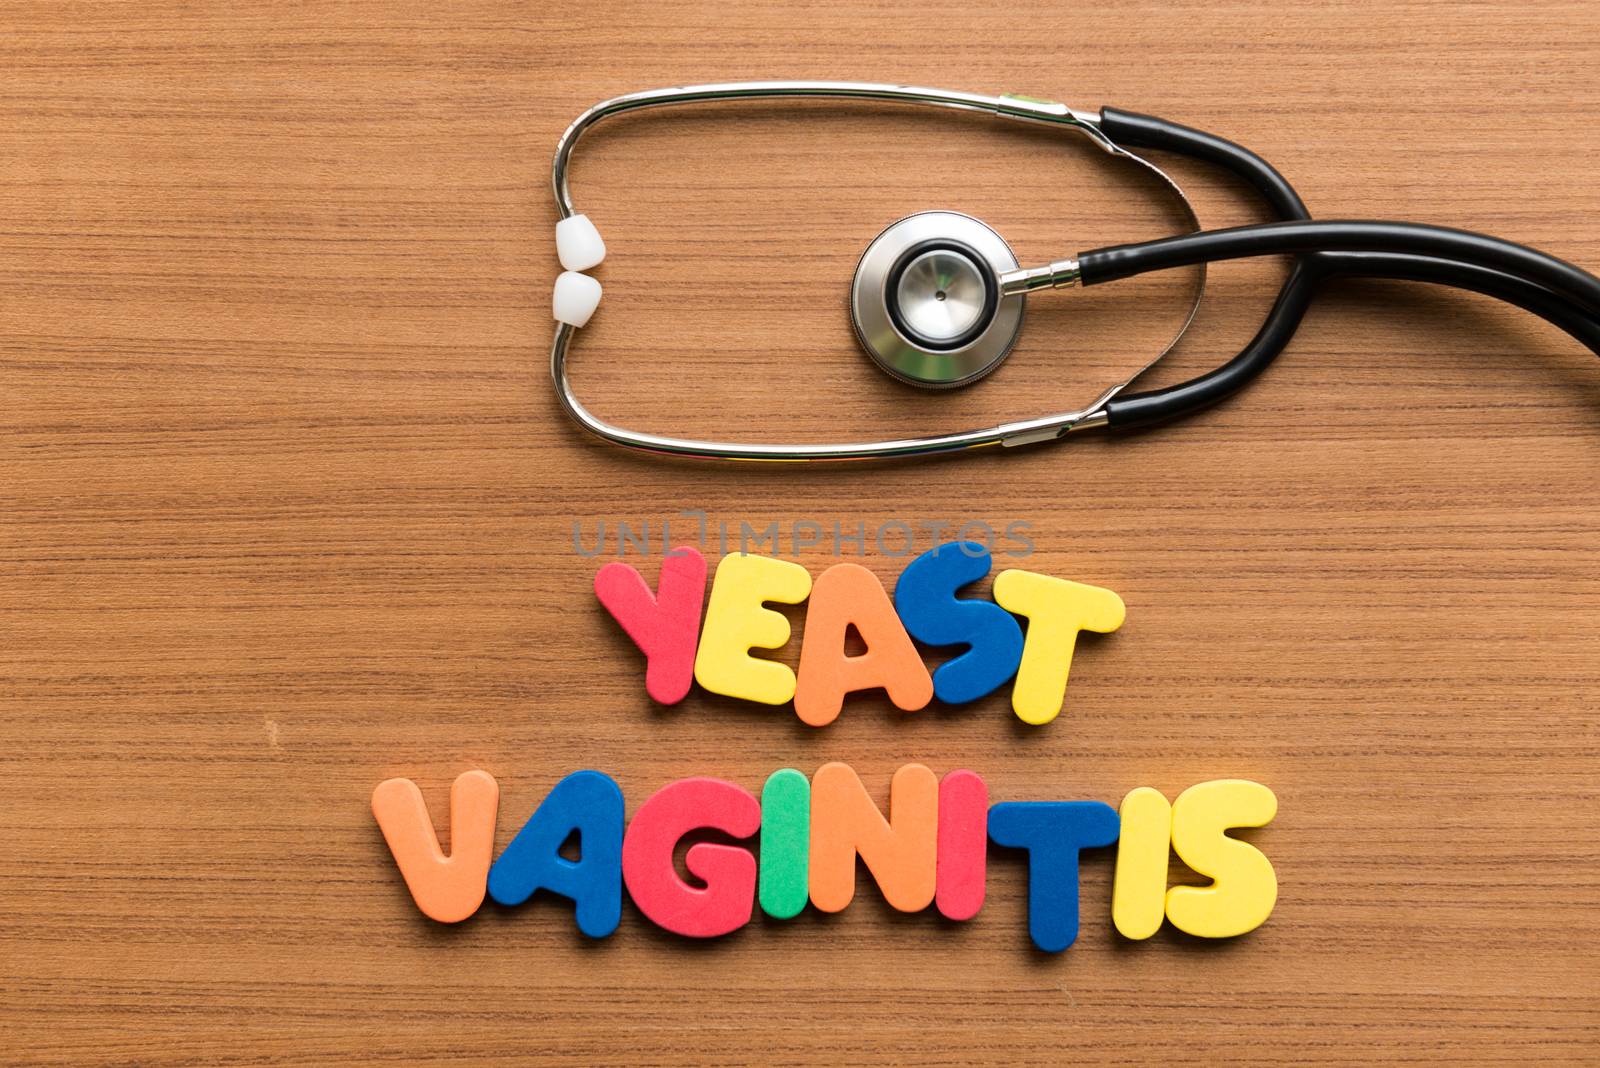 yeast vaginitis colorful word with stethoscope by sohel.parvez@hotmail.com